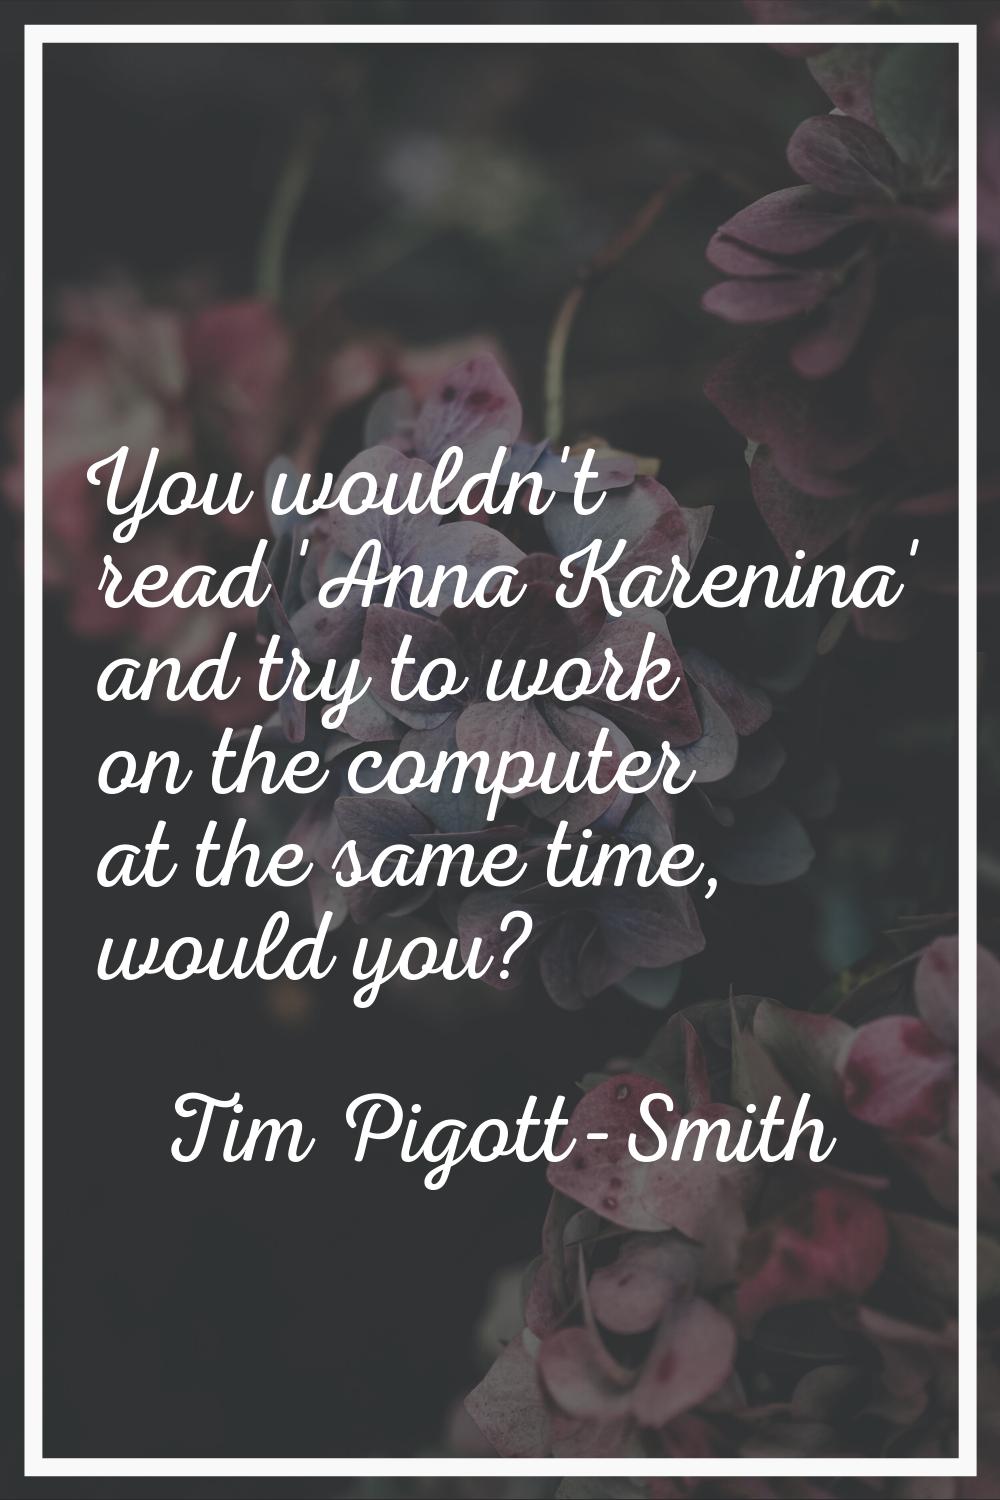 You wouldn't read 'Anna Karenina' and try to work on the computer at the same time, would you?